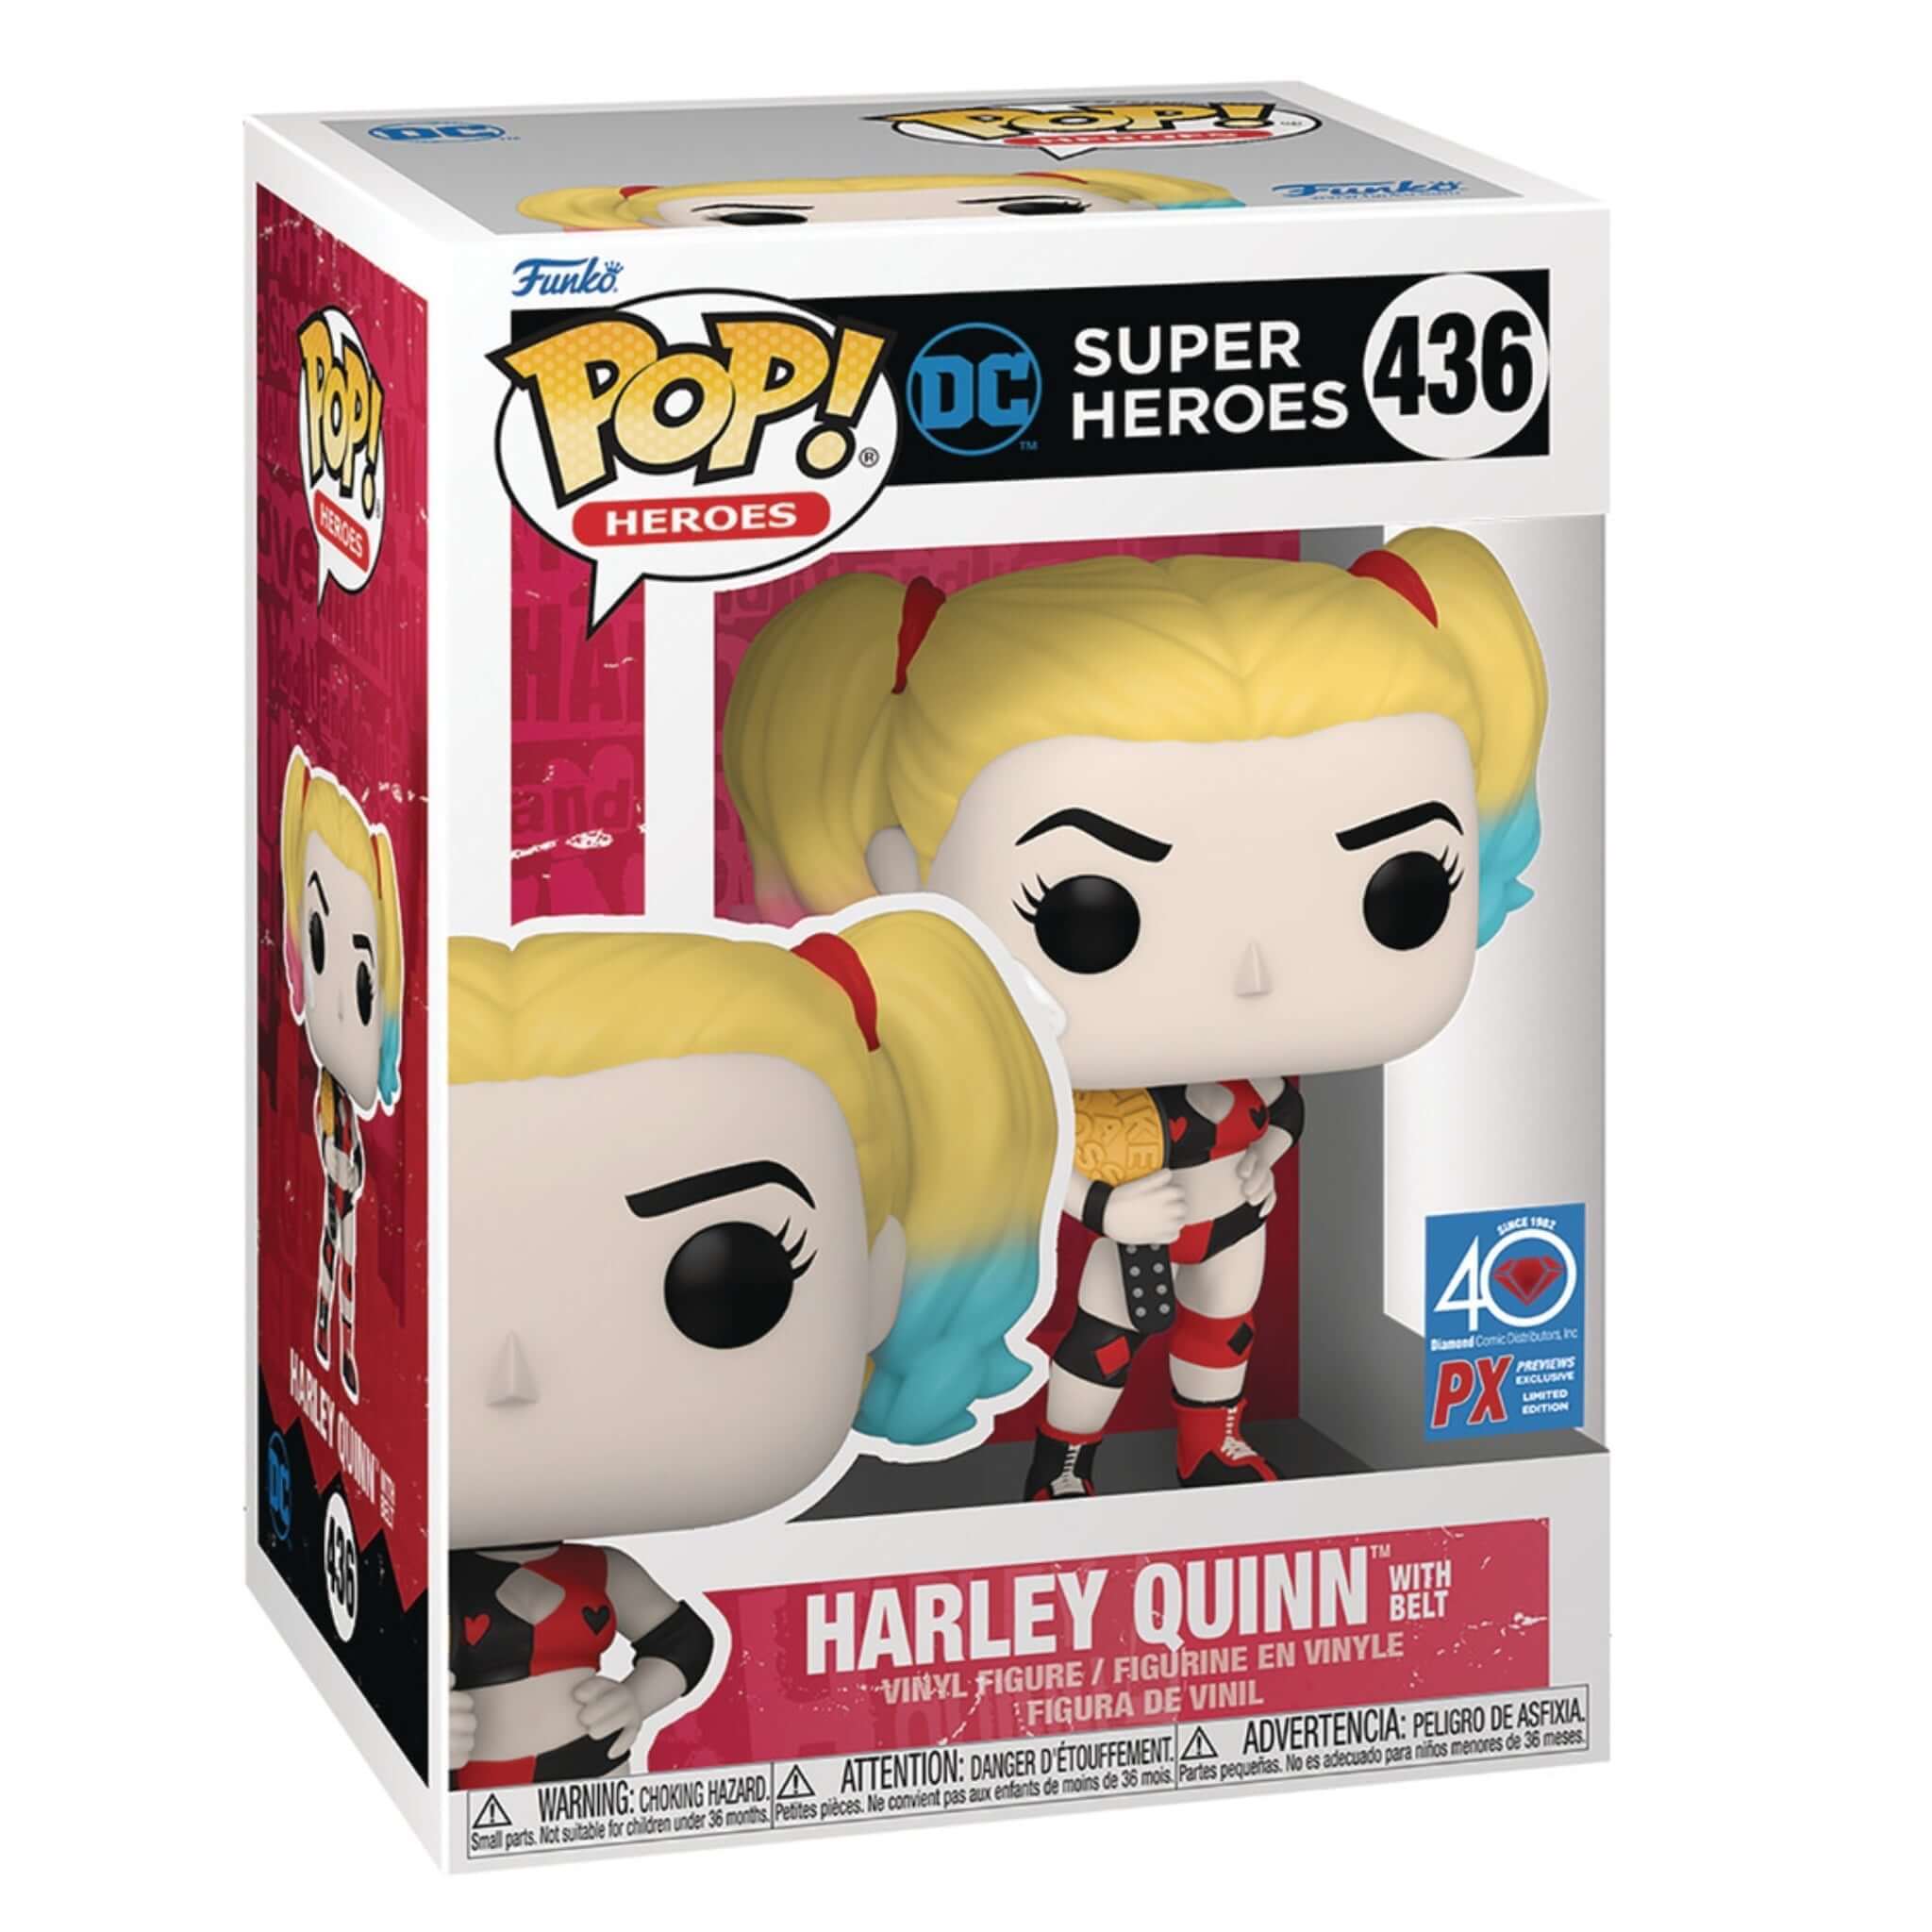 Harley Quinn with Belt Funko Pop! PX EXCLUSIVE